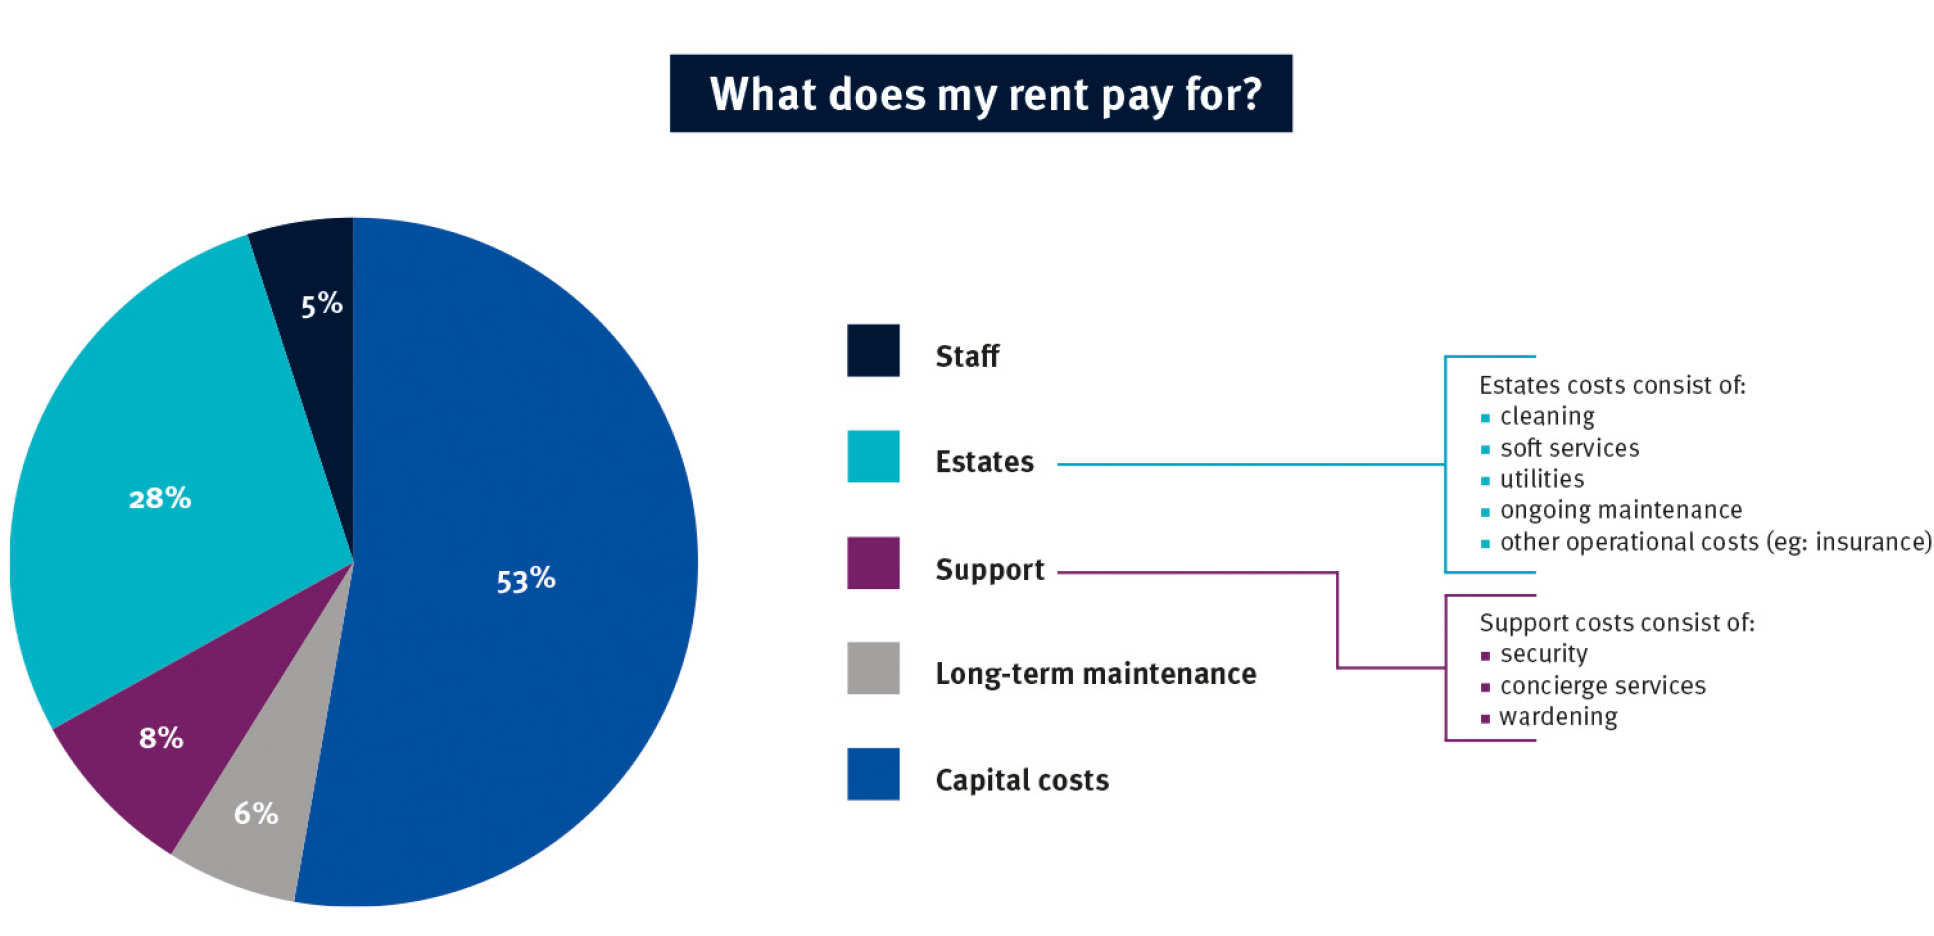 What does my rent pay for. 5% staff 28% estates 8% support 6% long-term maintenance 53% capital costs